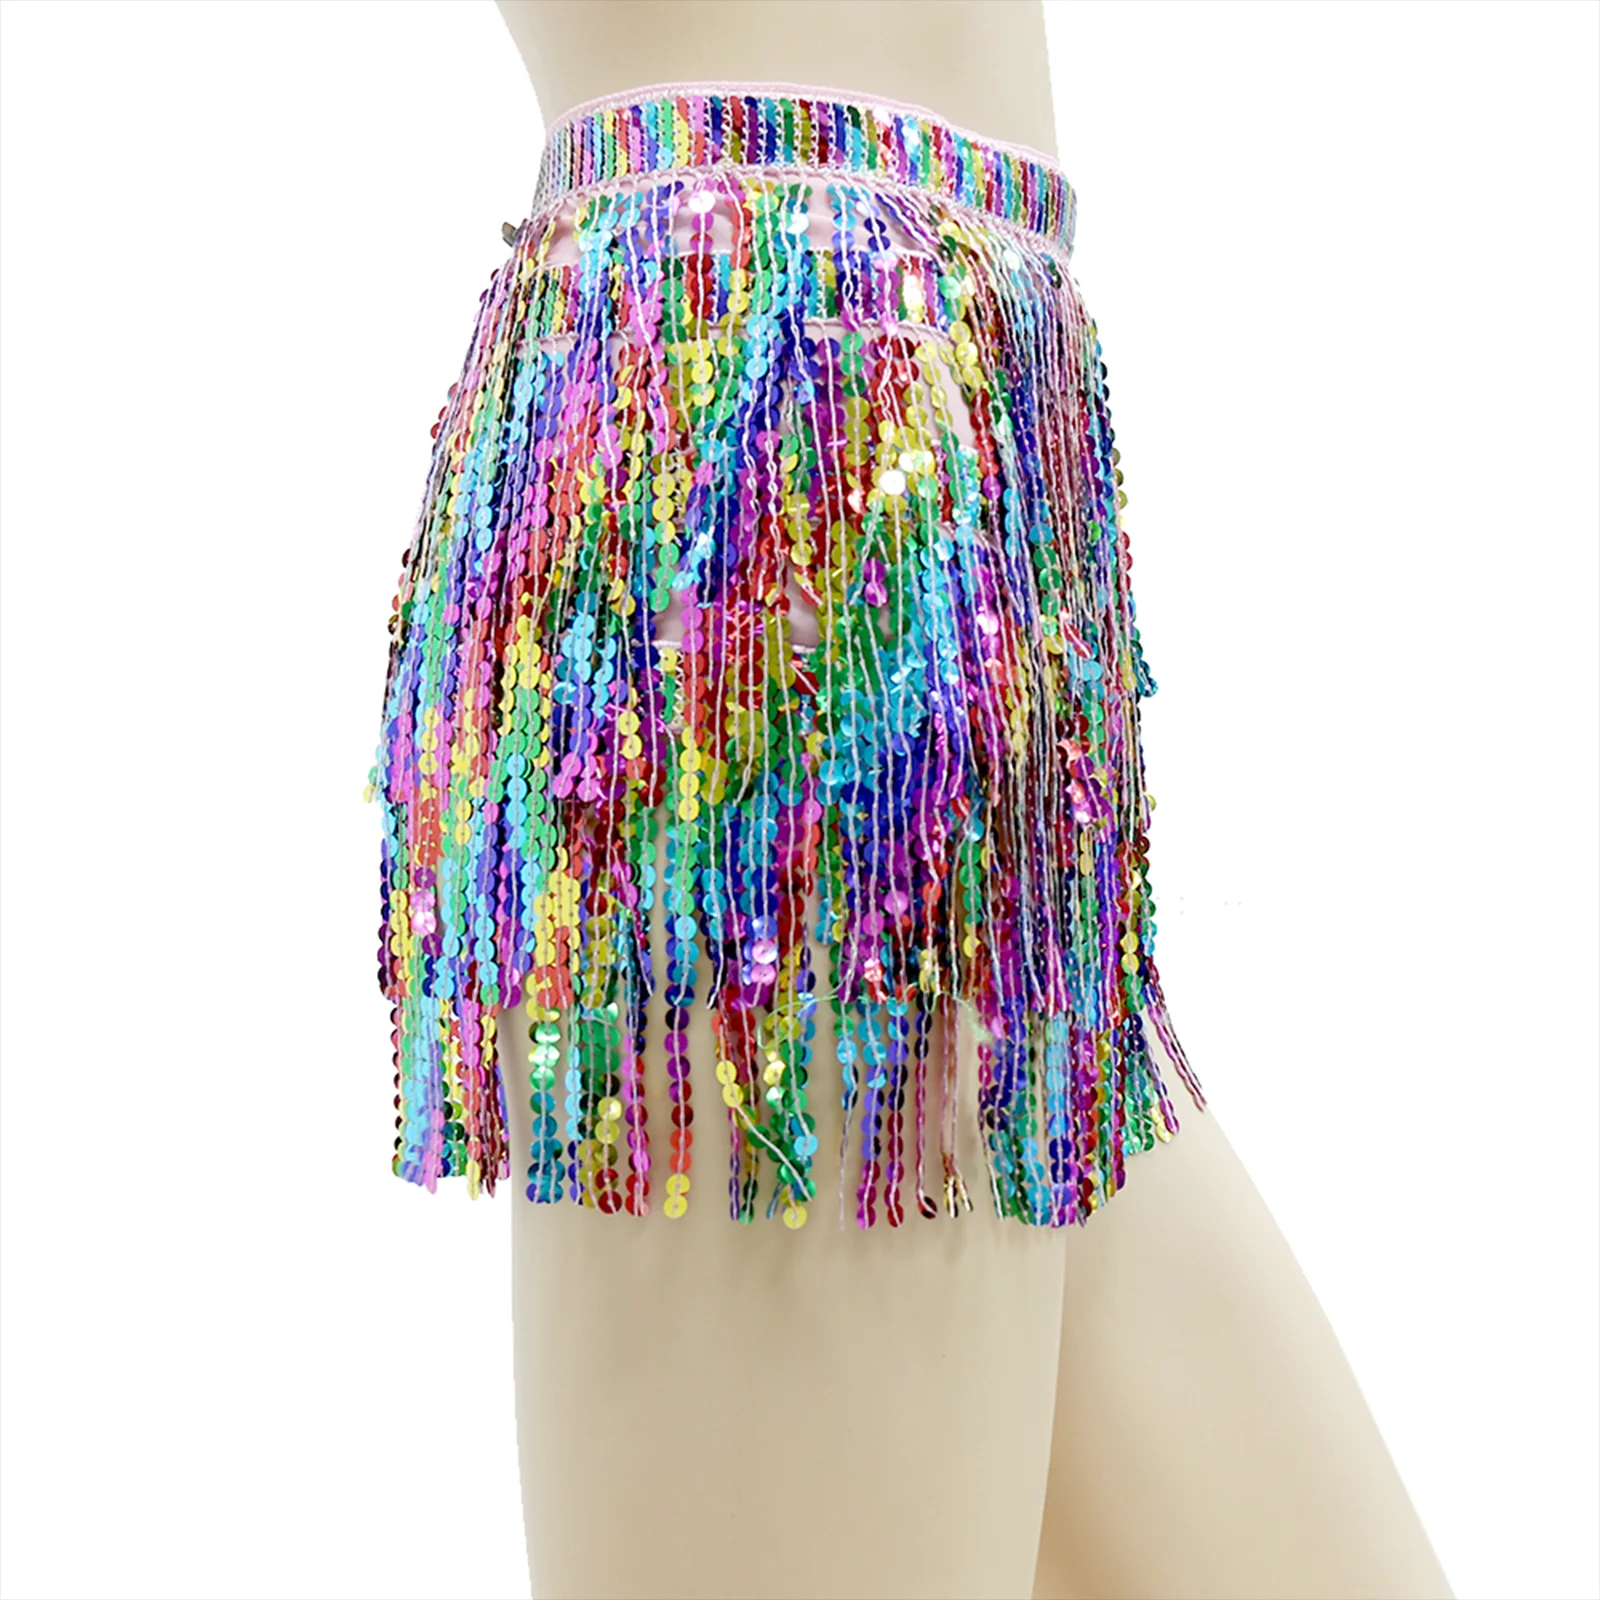 Dance Performance Skirt Rave Party Dance Performance Costume Boho Belly Skirt for Summer Beach Carnival Stage Clubwear Cosplay